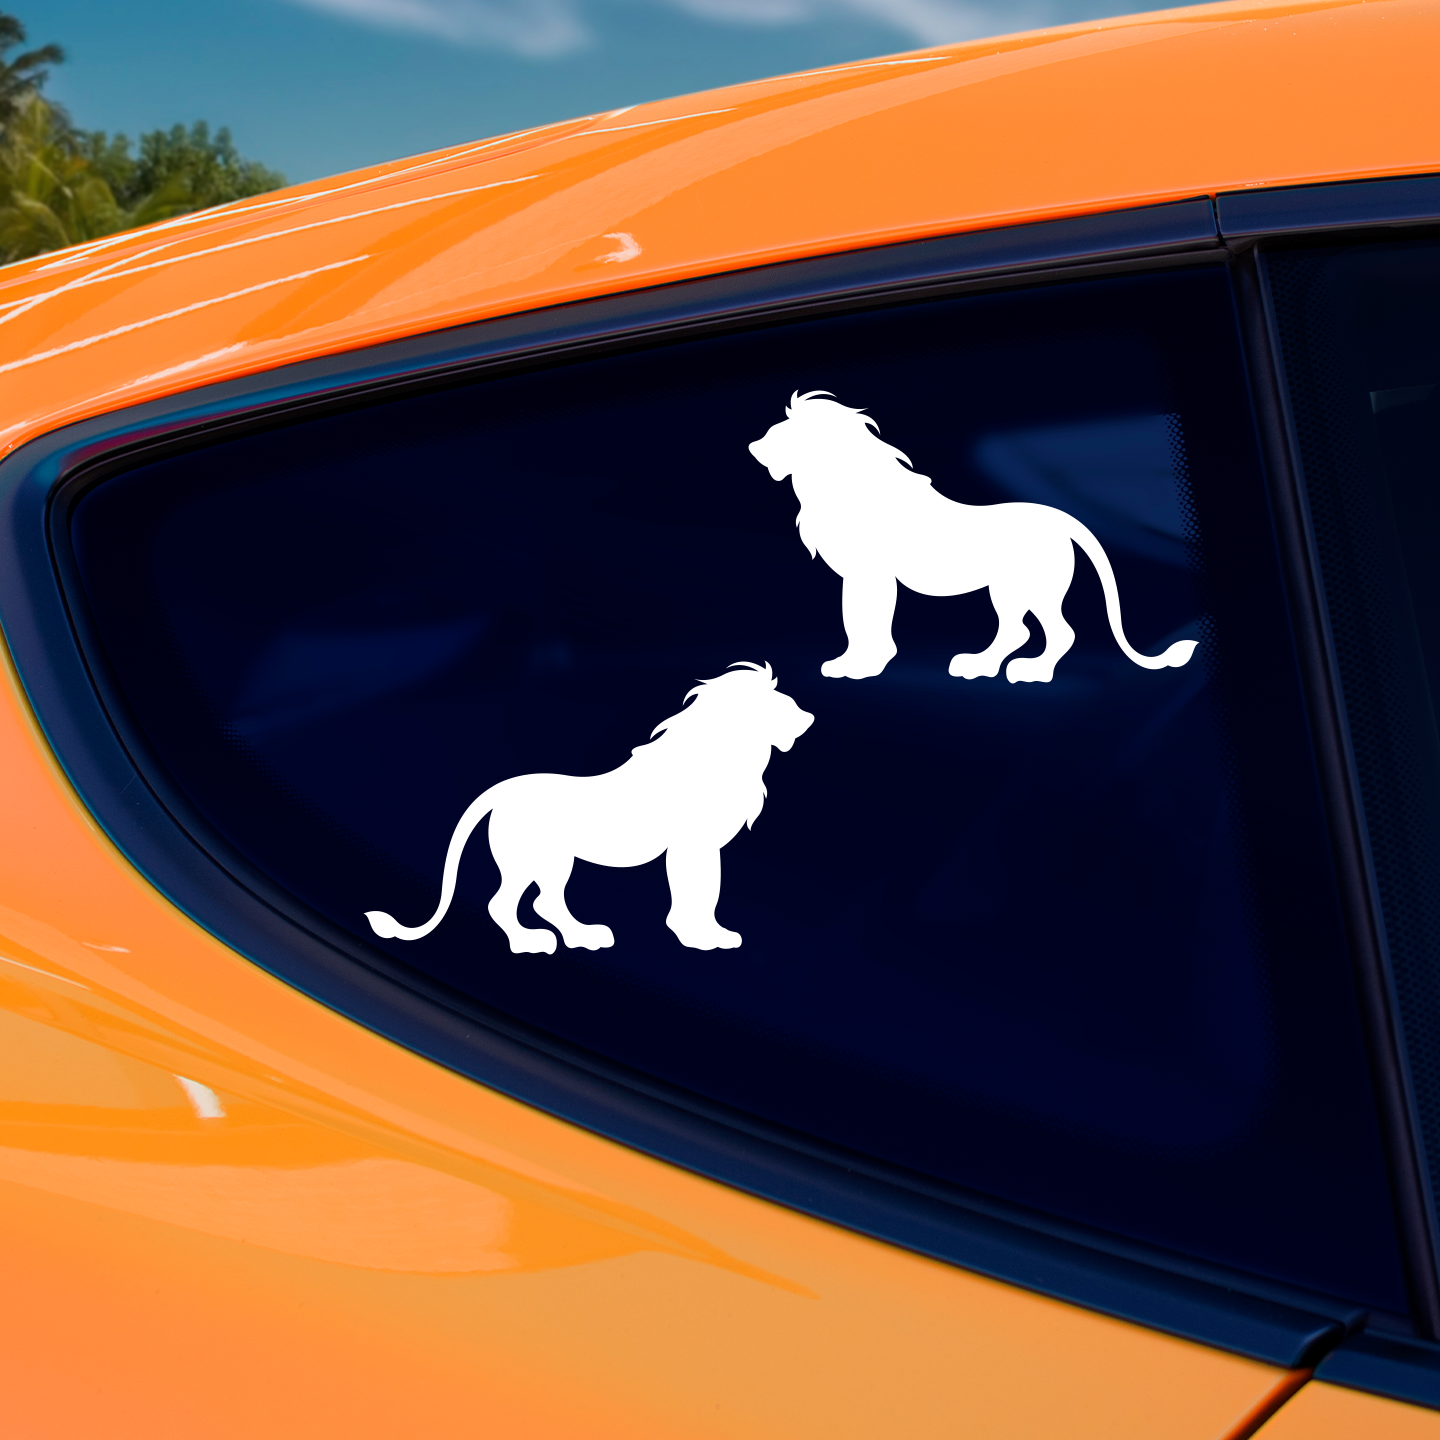 Lion Silhouette Stickers